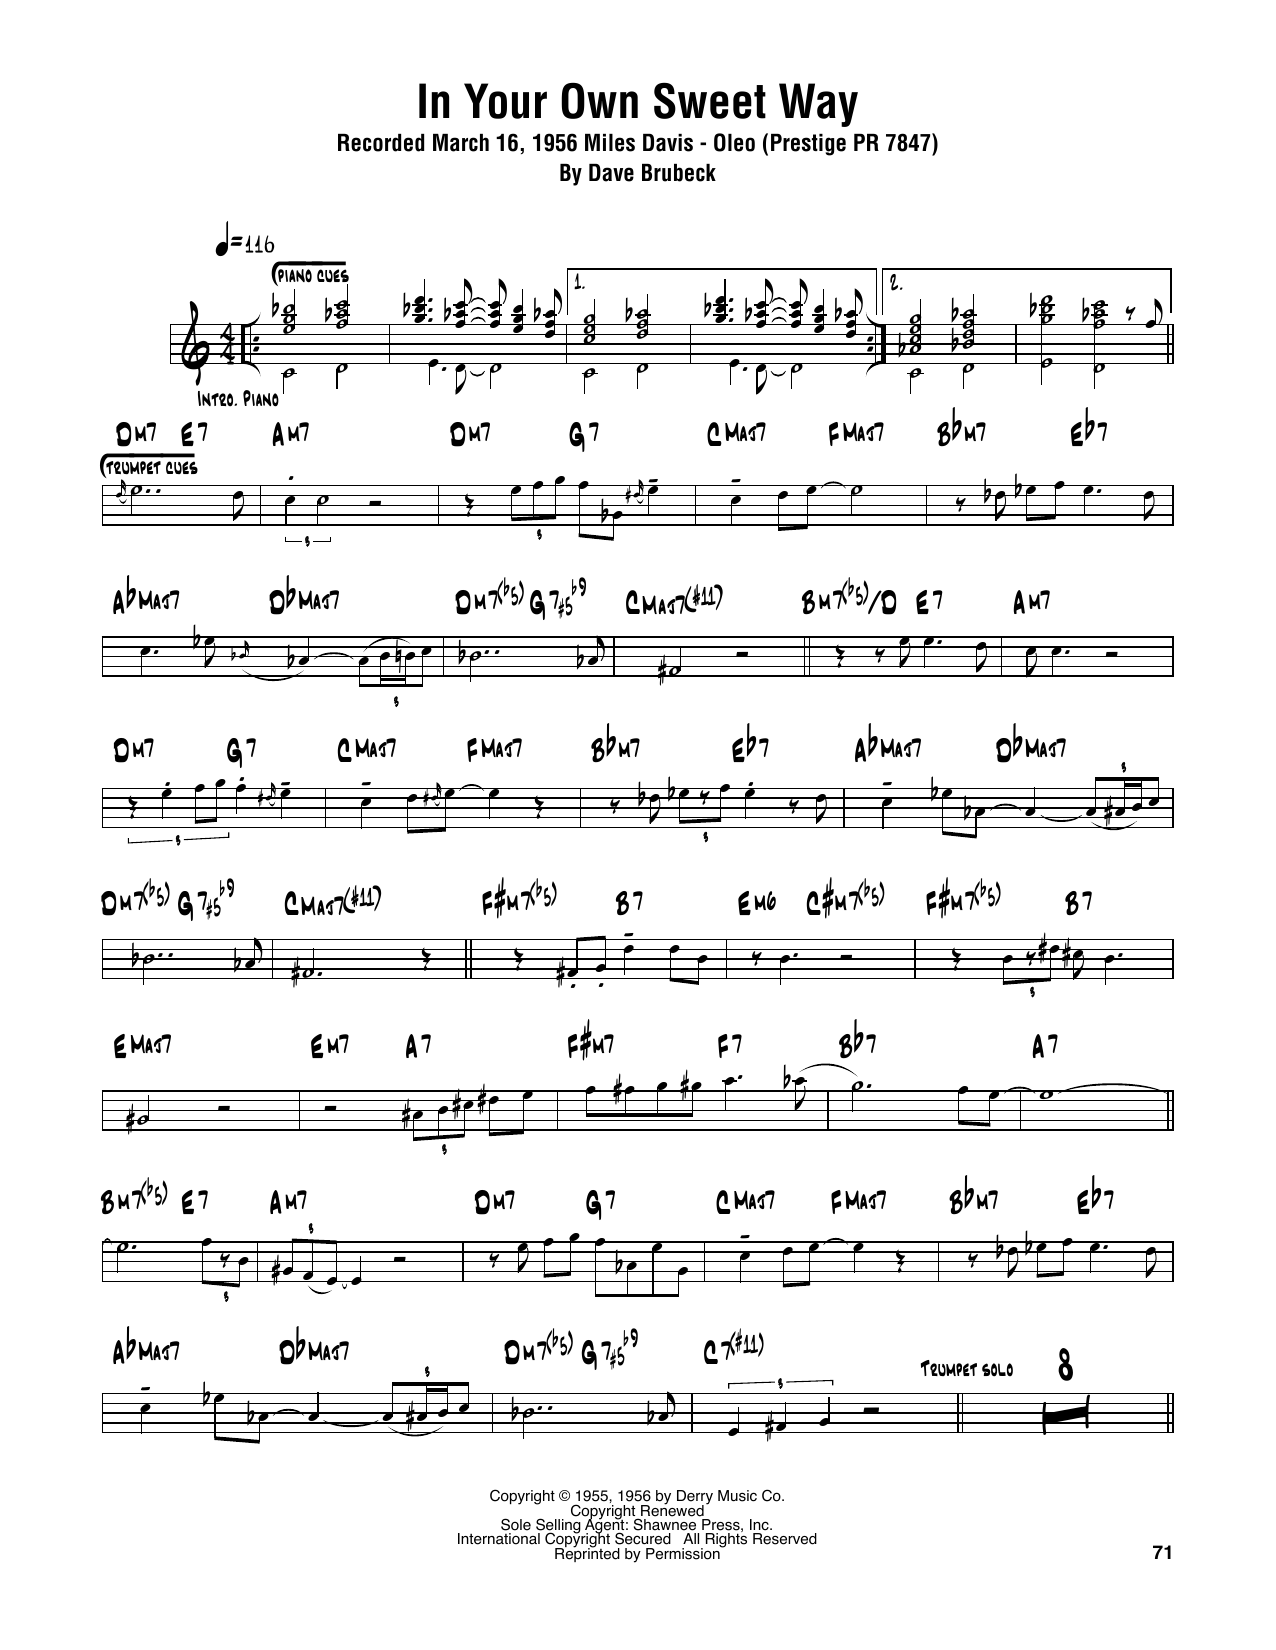 Download Sonny Rollins In Your Own Sweet Way Sheet Music